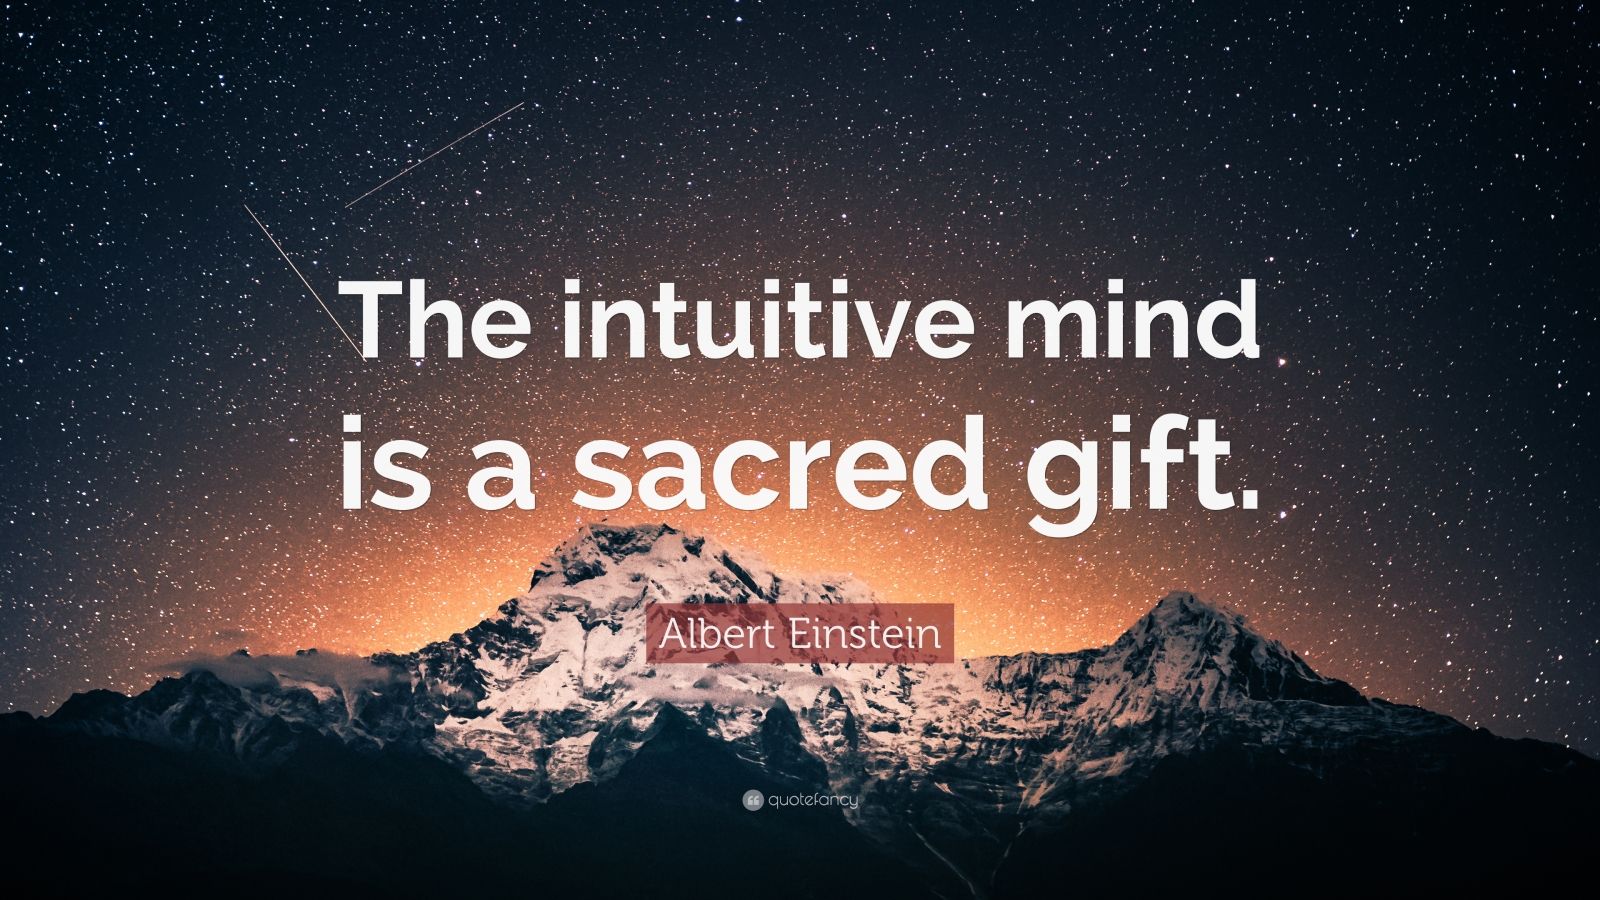 Albert Einstein Quote “The intuitive mind is a sacred gift.”